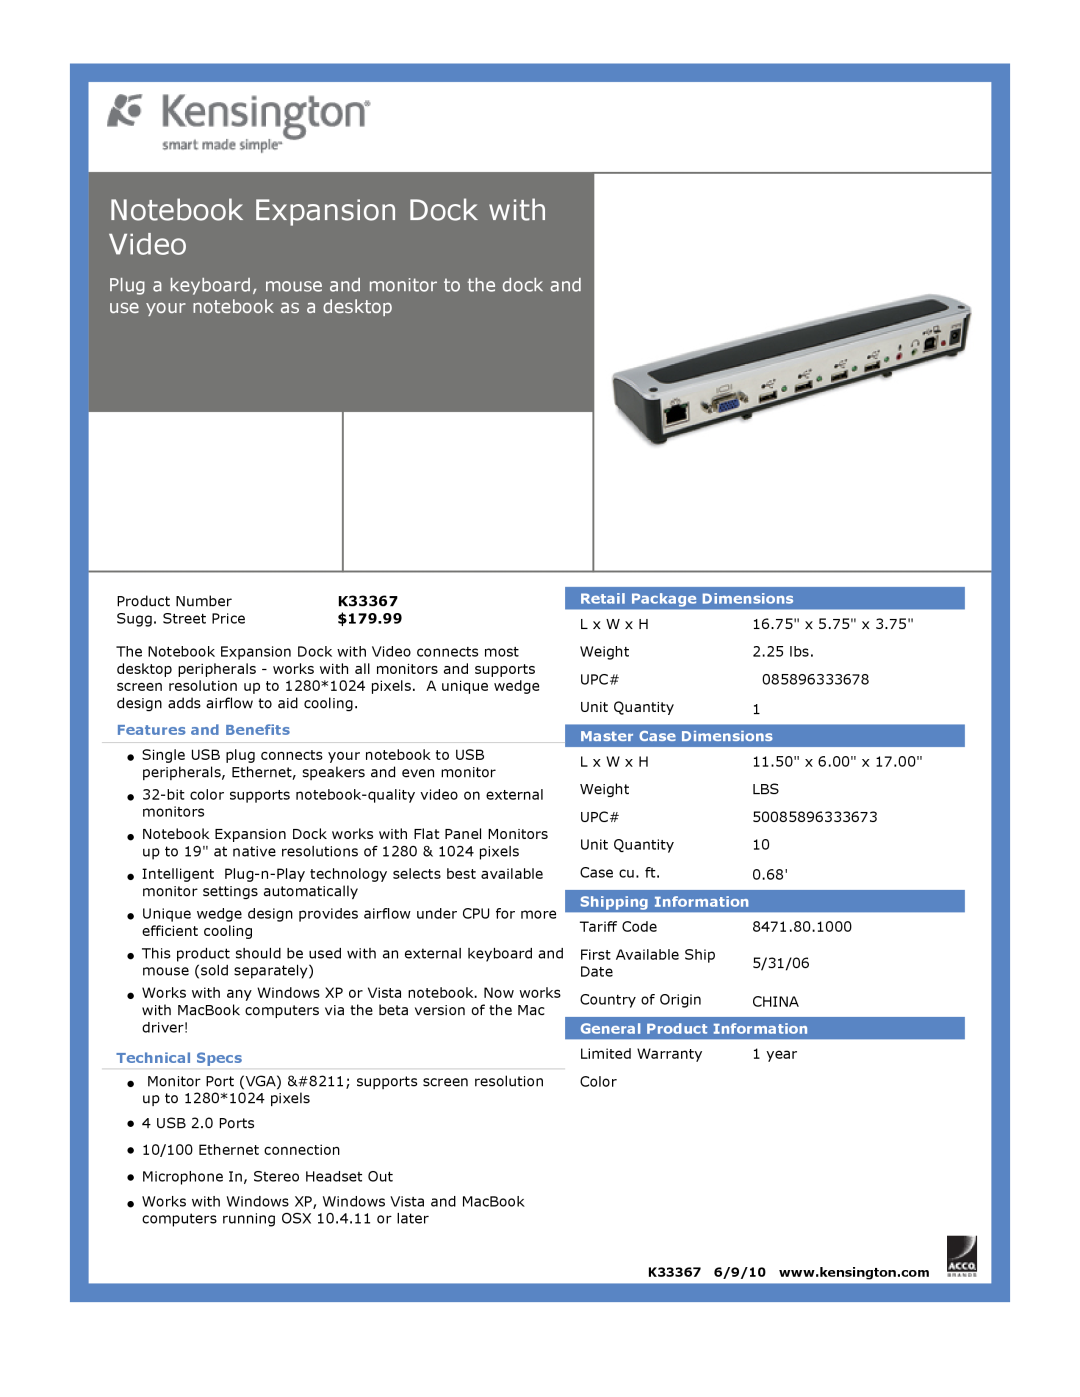 Kensington EU64325 dimensions Notebook Expansion Dock with Video, K33367, Features and Benefits, Technical Specs 